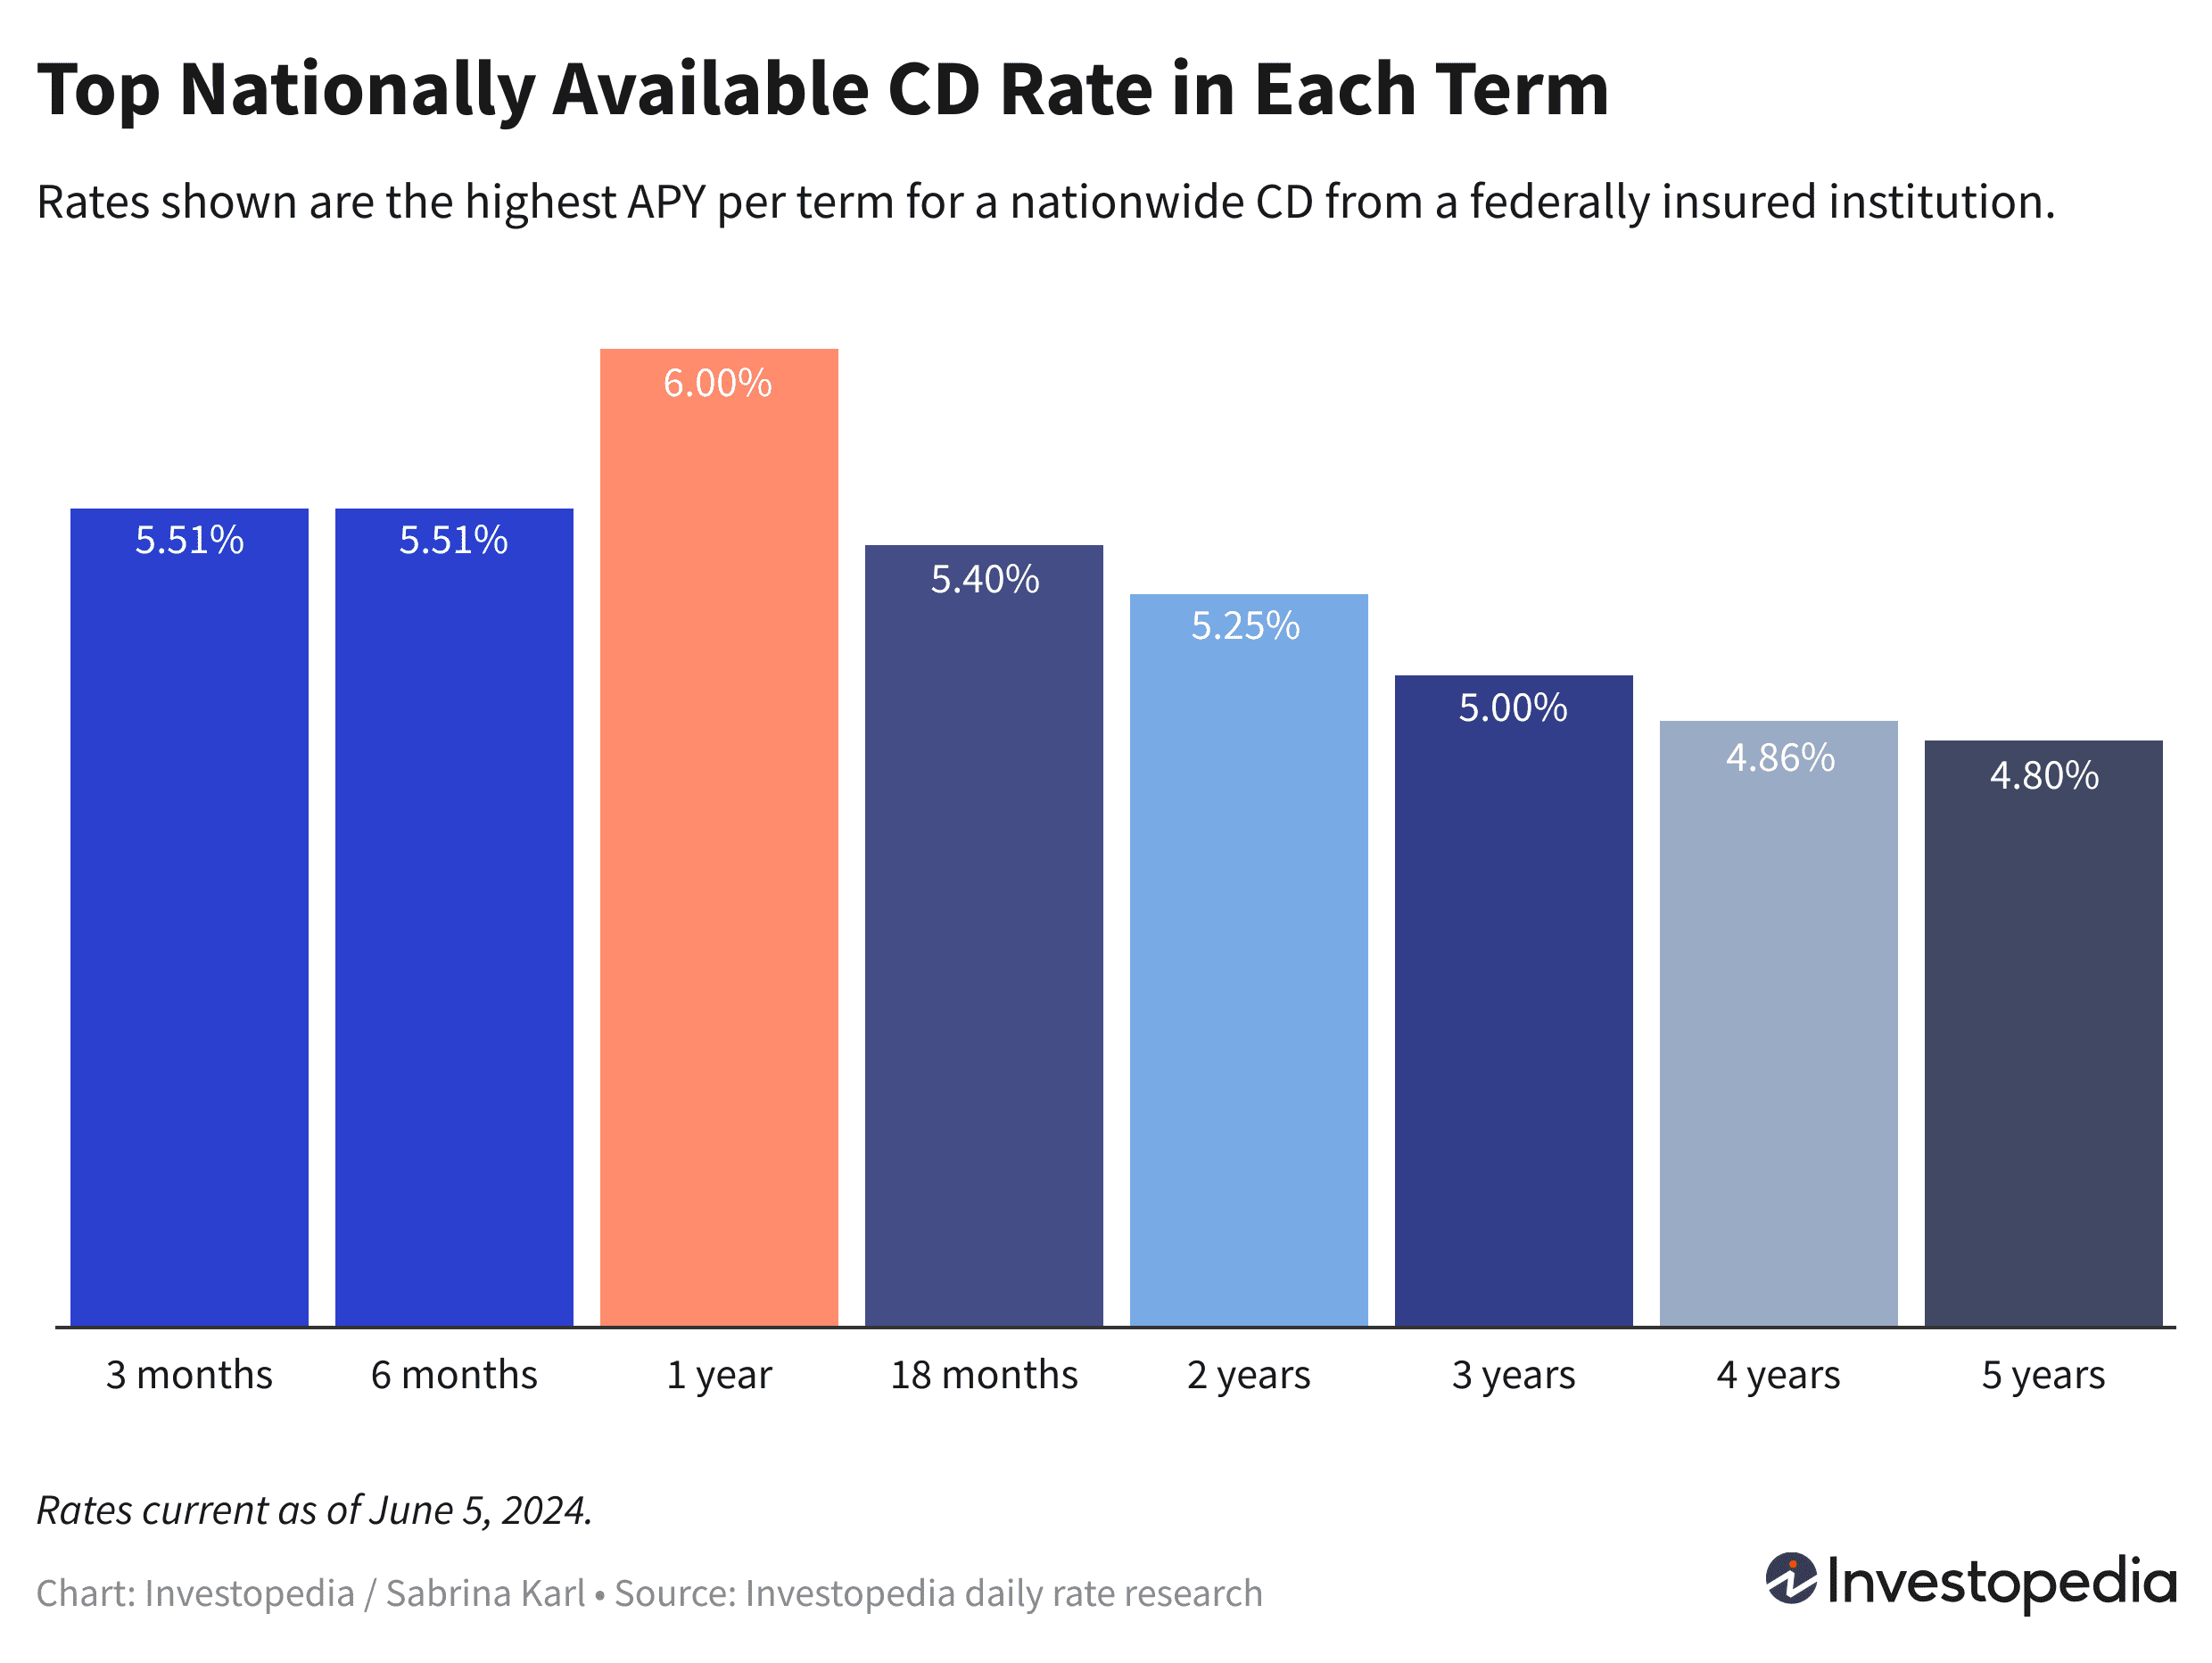 Top nationwide CD rate in each term, ranging from 4.80% to 5.51%, current as of June 5, 2024.